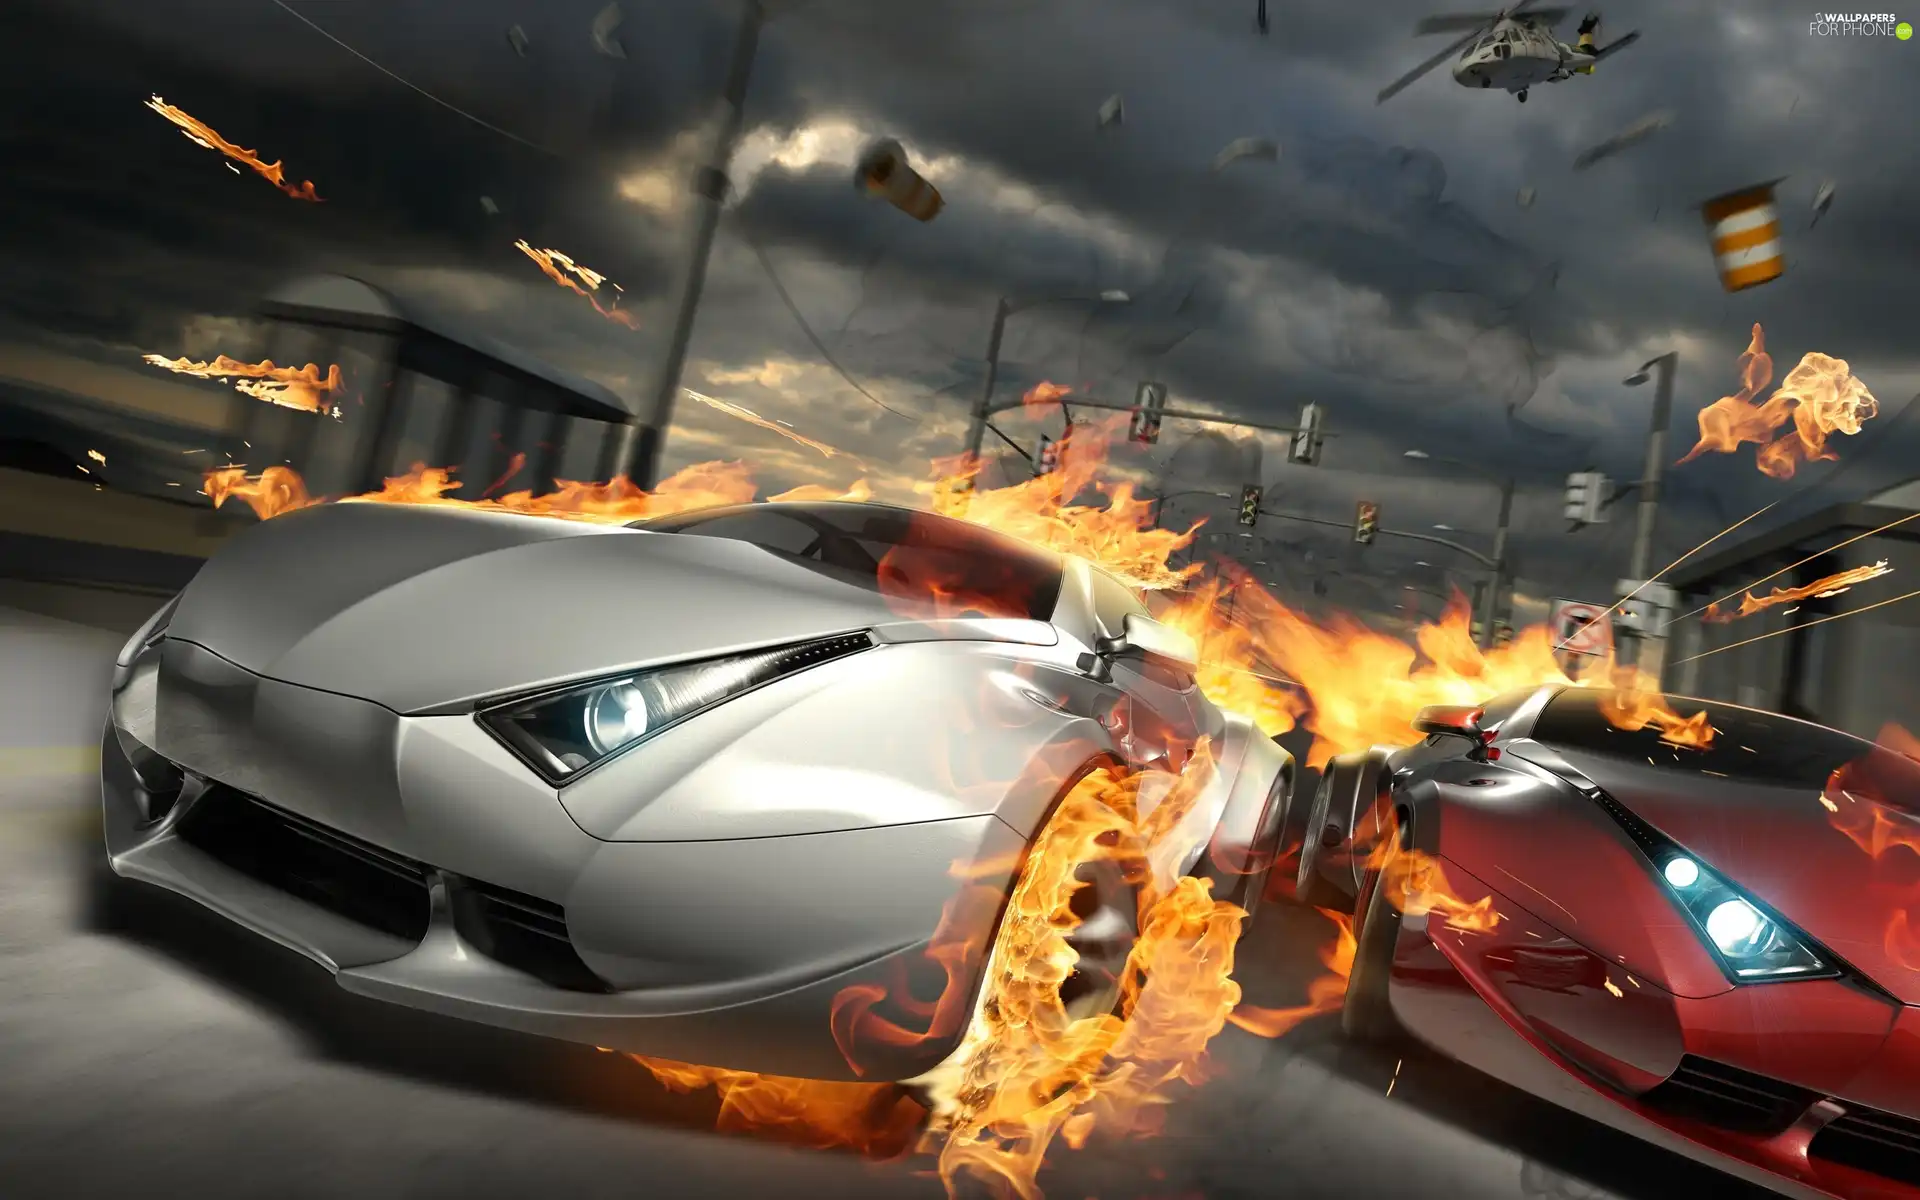 Helicopter, cars, Flames